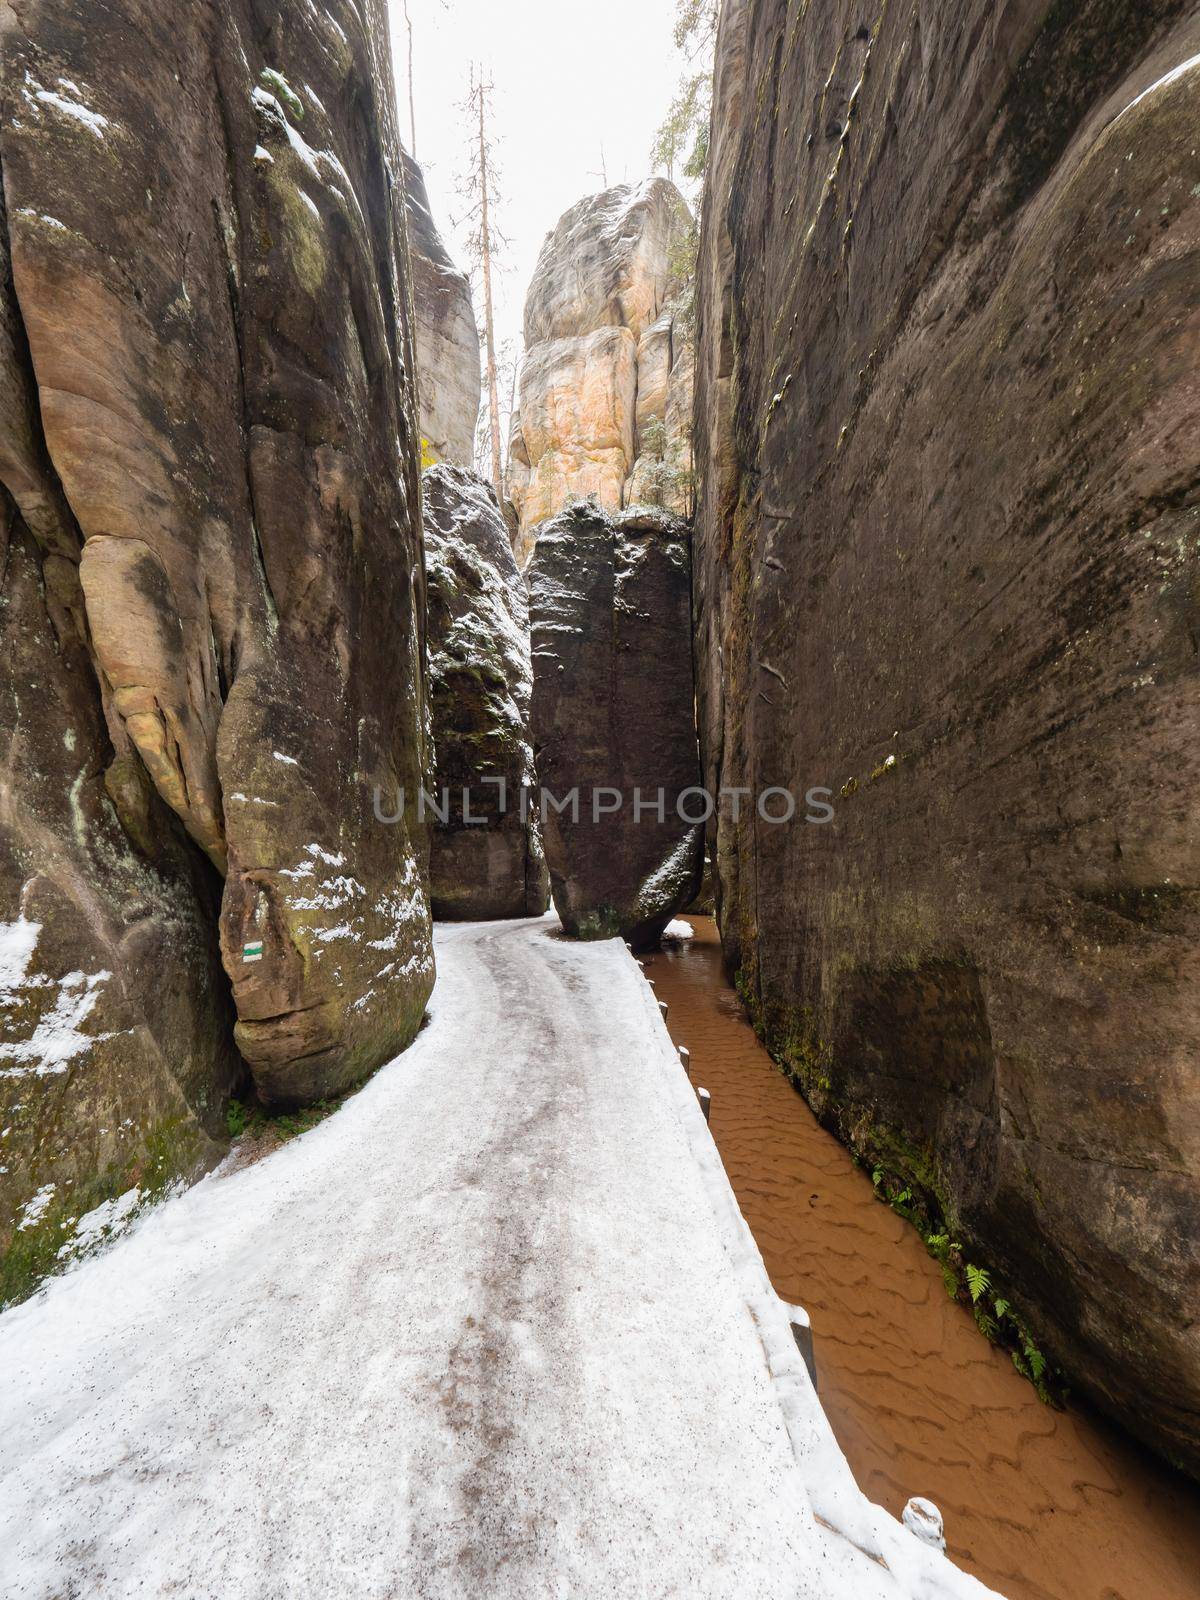 Scenic detail of path in Sandstone rocky labyrinth  in  Adrspach during winter by rdonar2